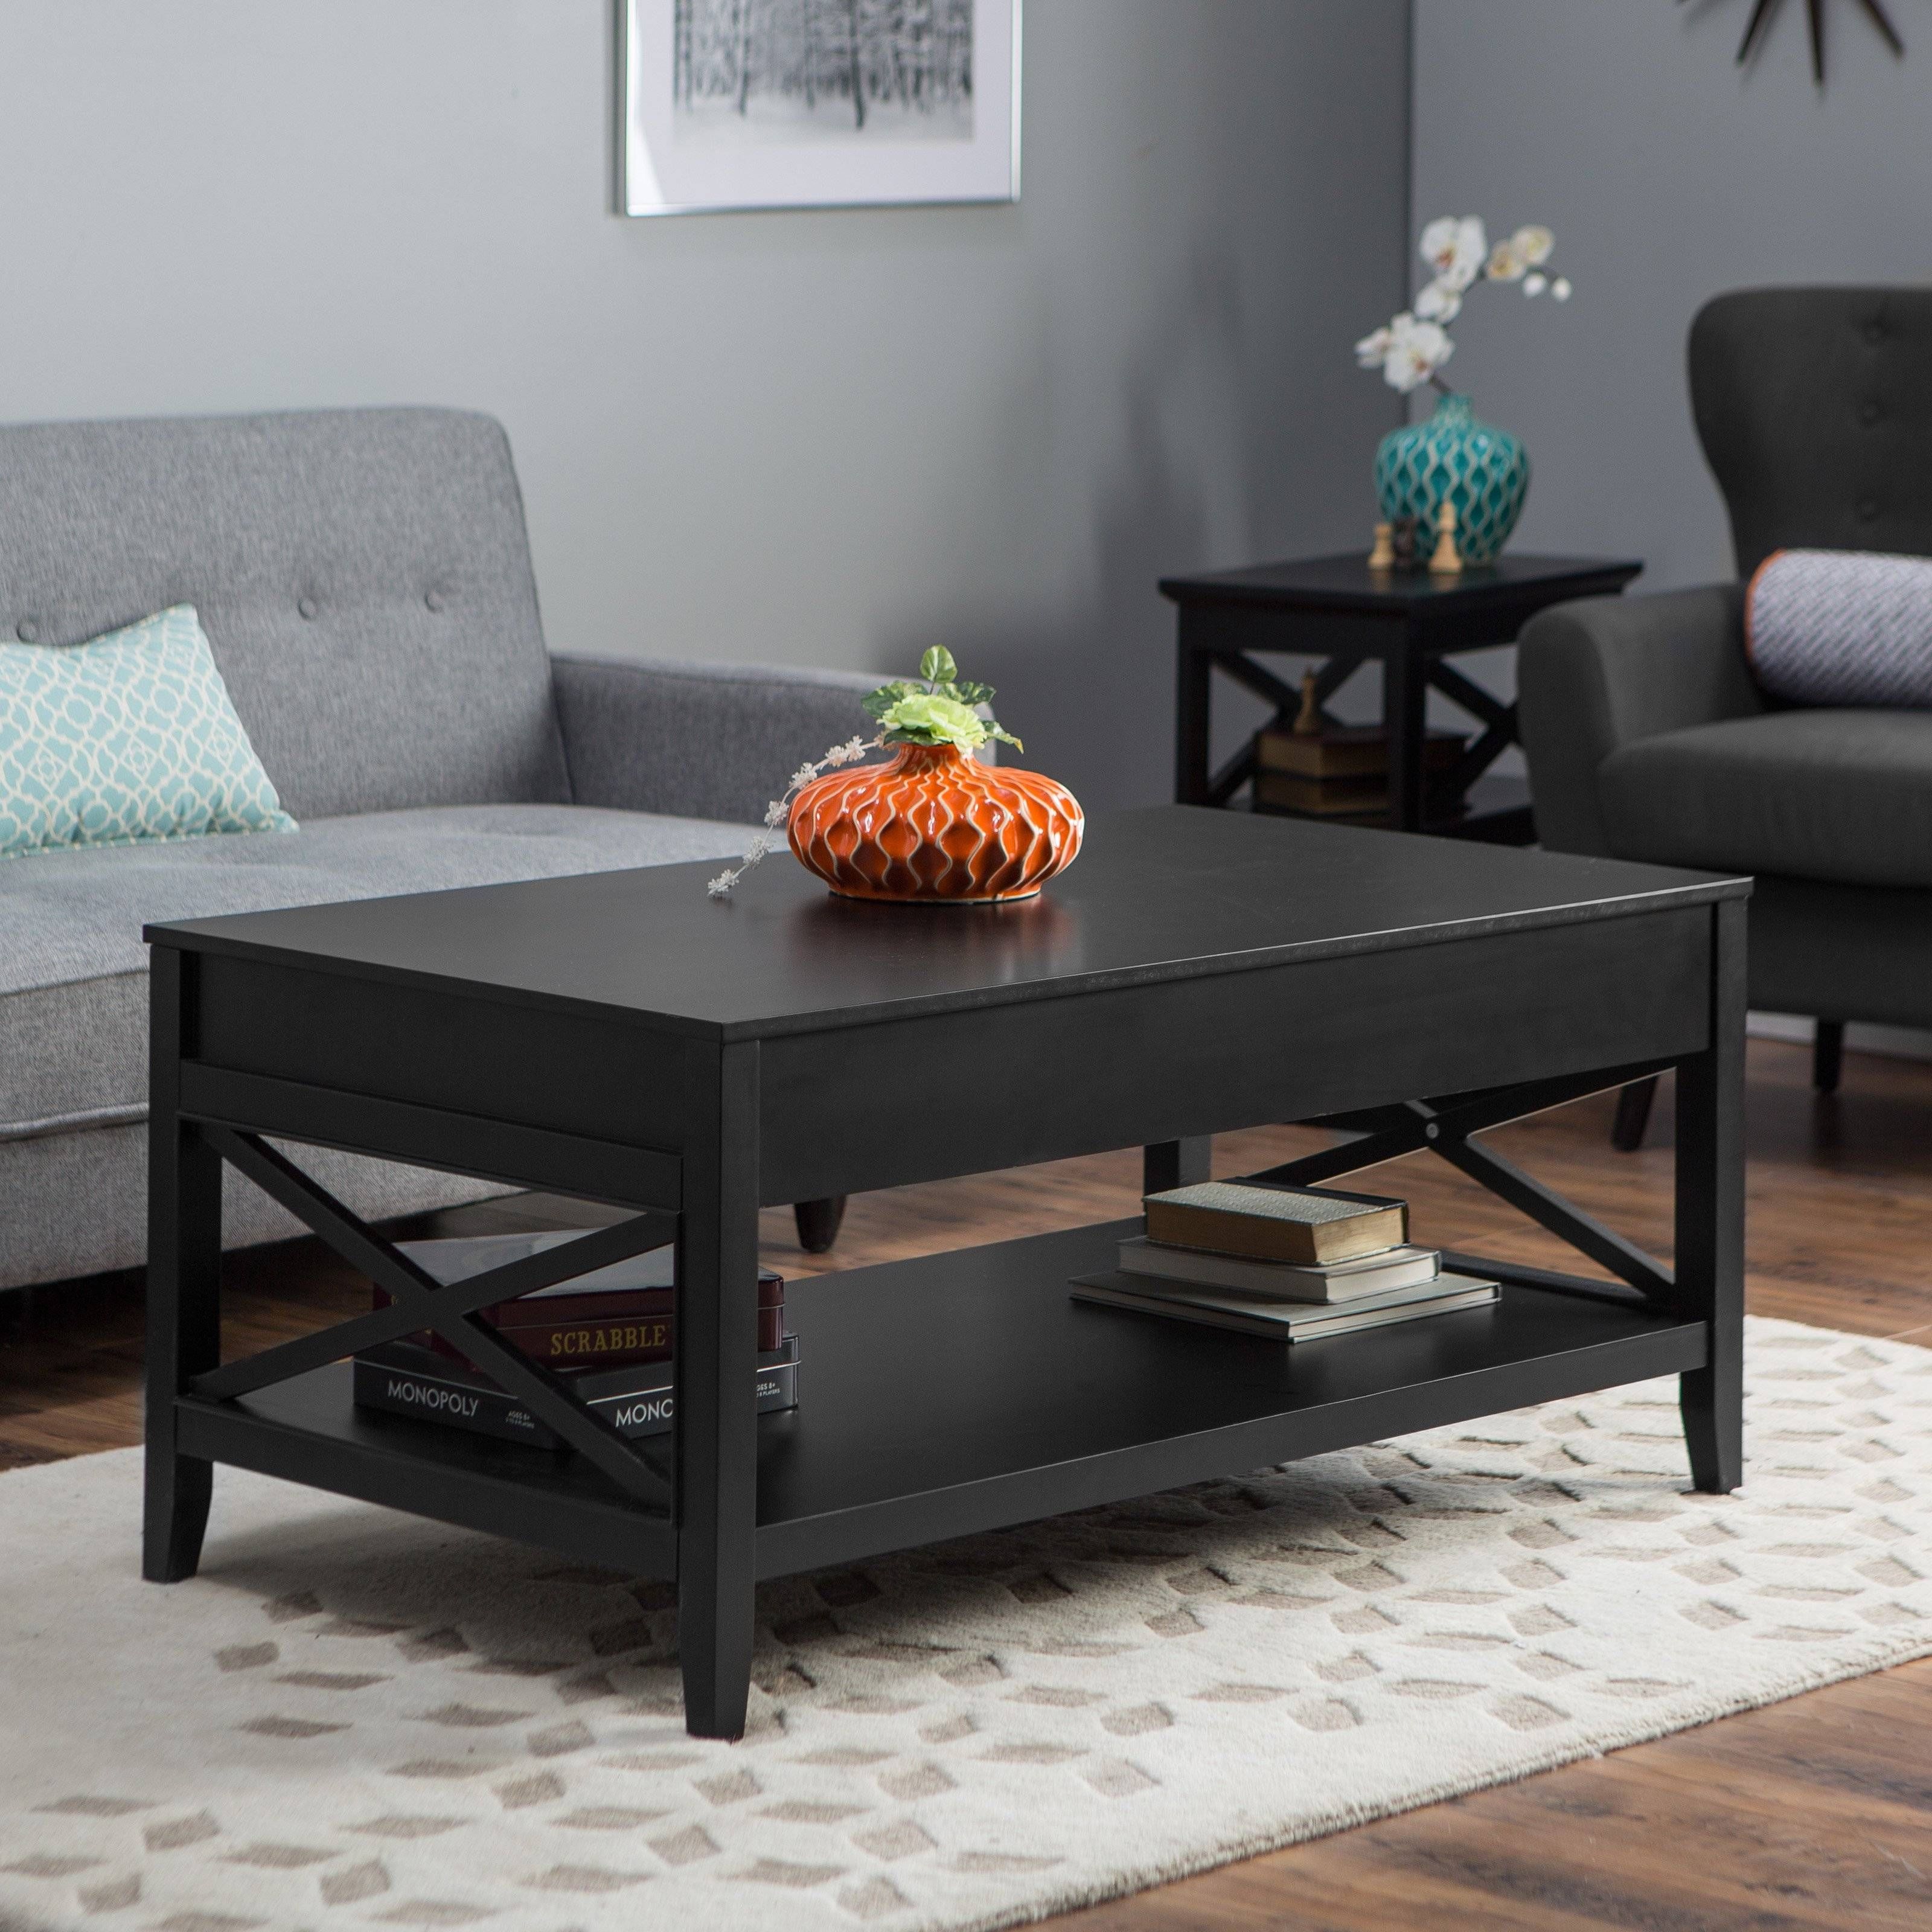 Belham Living Hampton Storage And Lift Top Coffee Table | Hayneedle Pertaining To Glass Lift Top Coffee Tables (View 19 of 30)